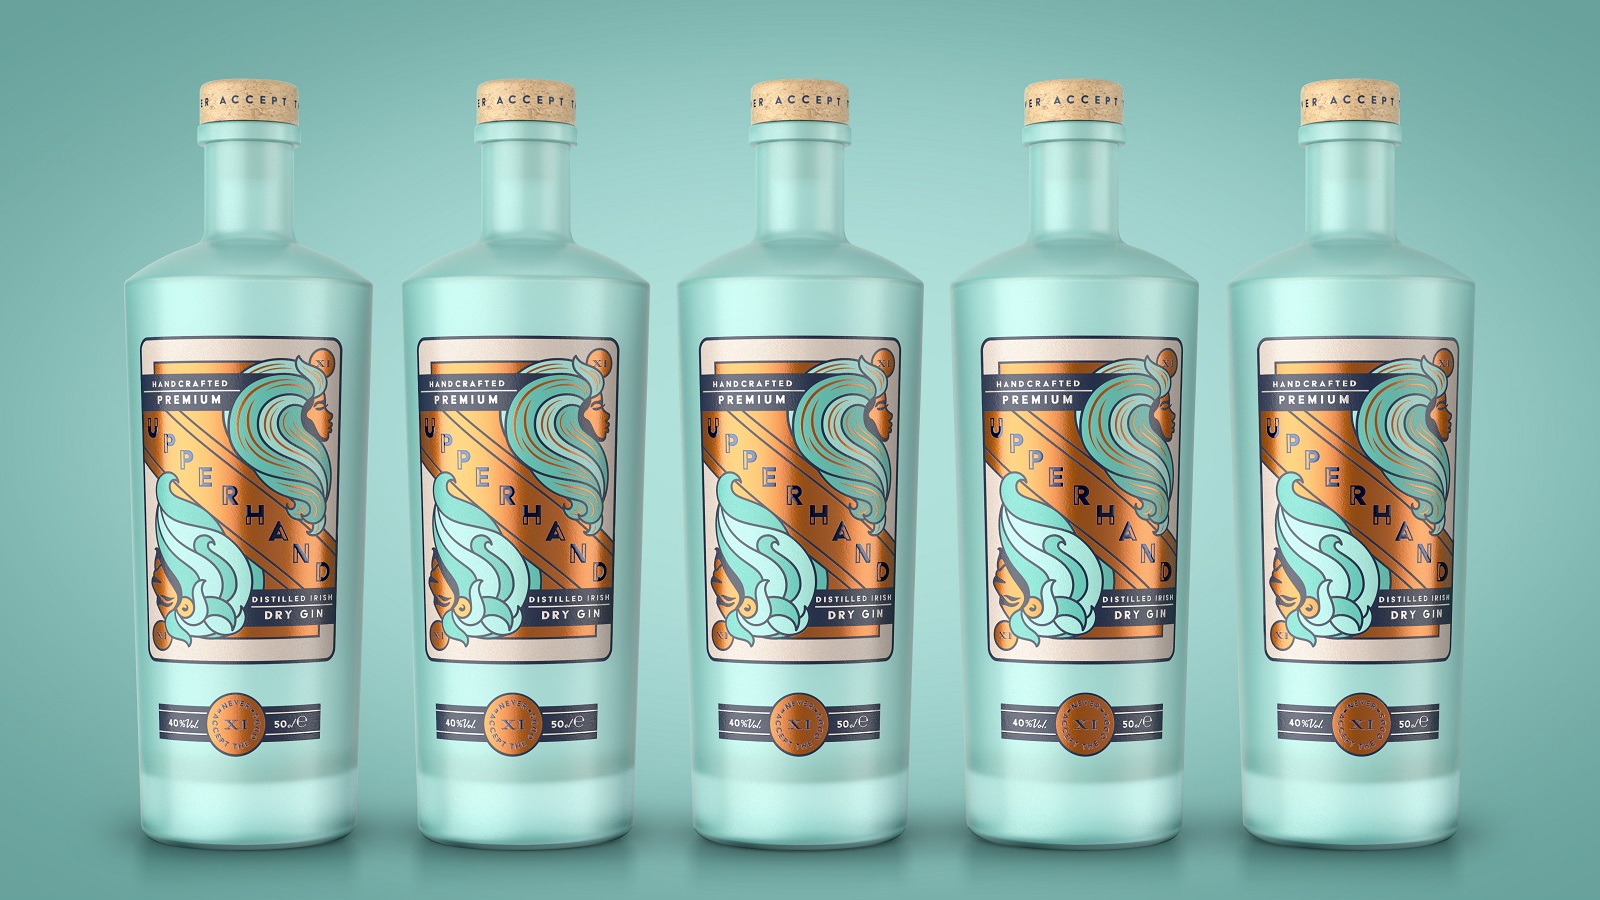 Tarot-Inspired Gin Packaging to Challenge Conventions